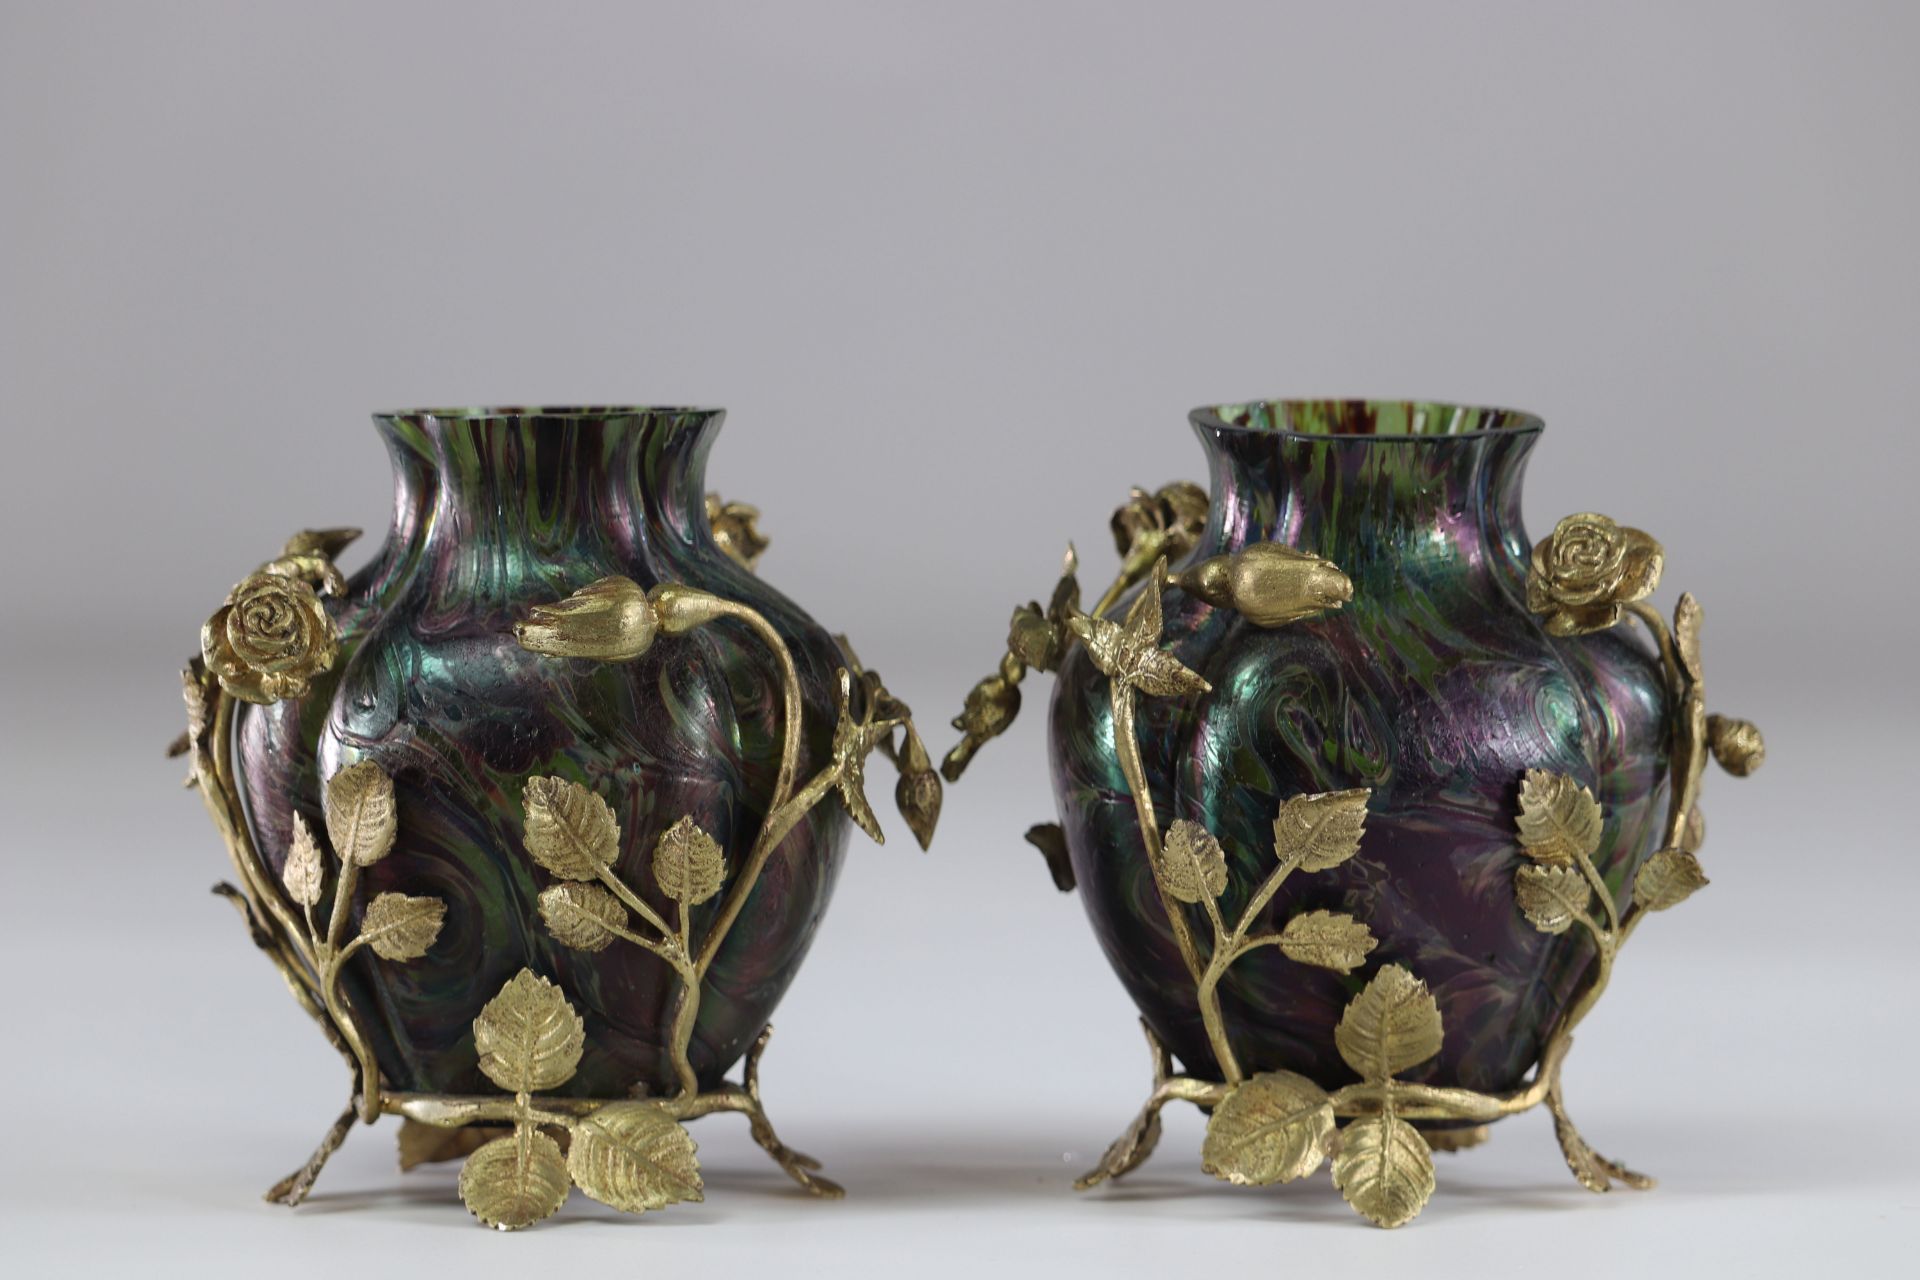 Pair of Art Nouveau vases in the spirit of Loetz decorated with bronze roses